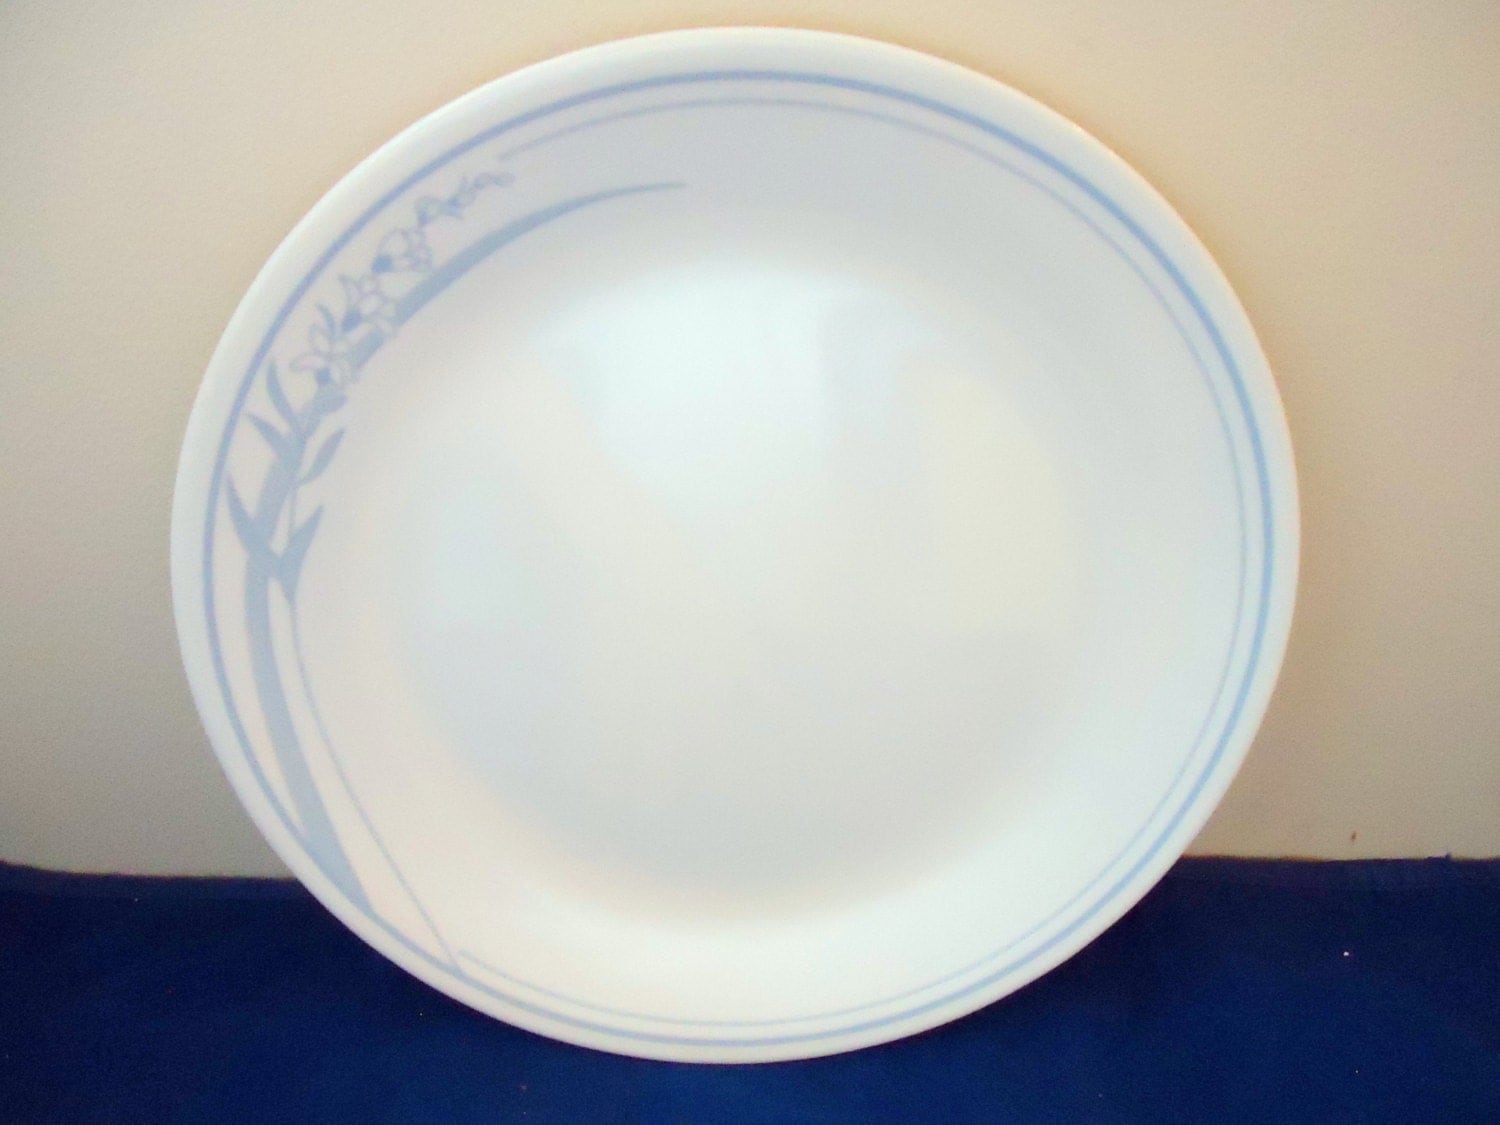 Corelle Blue Lily Dinner Plate by EPACKS on Etsy